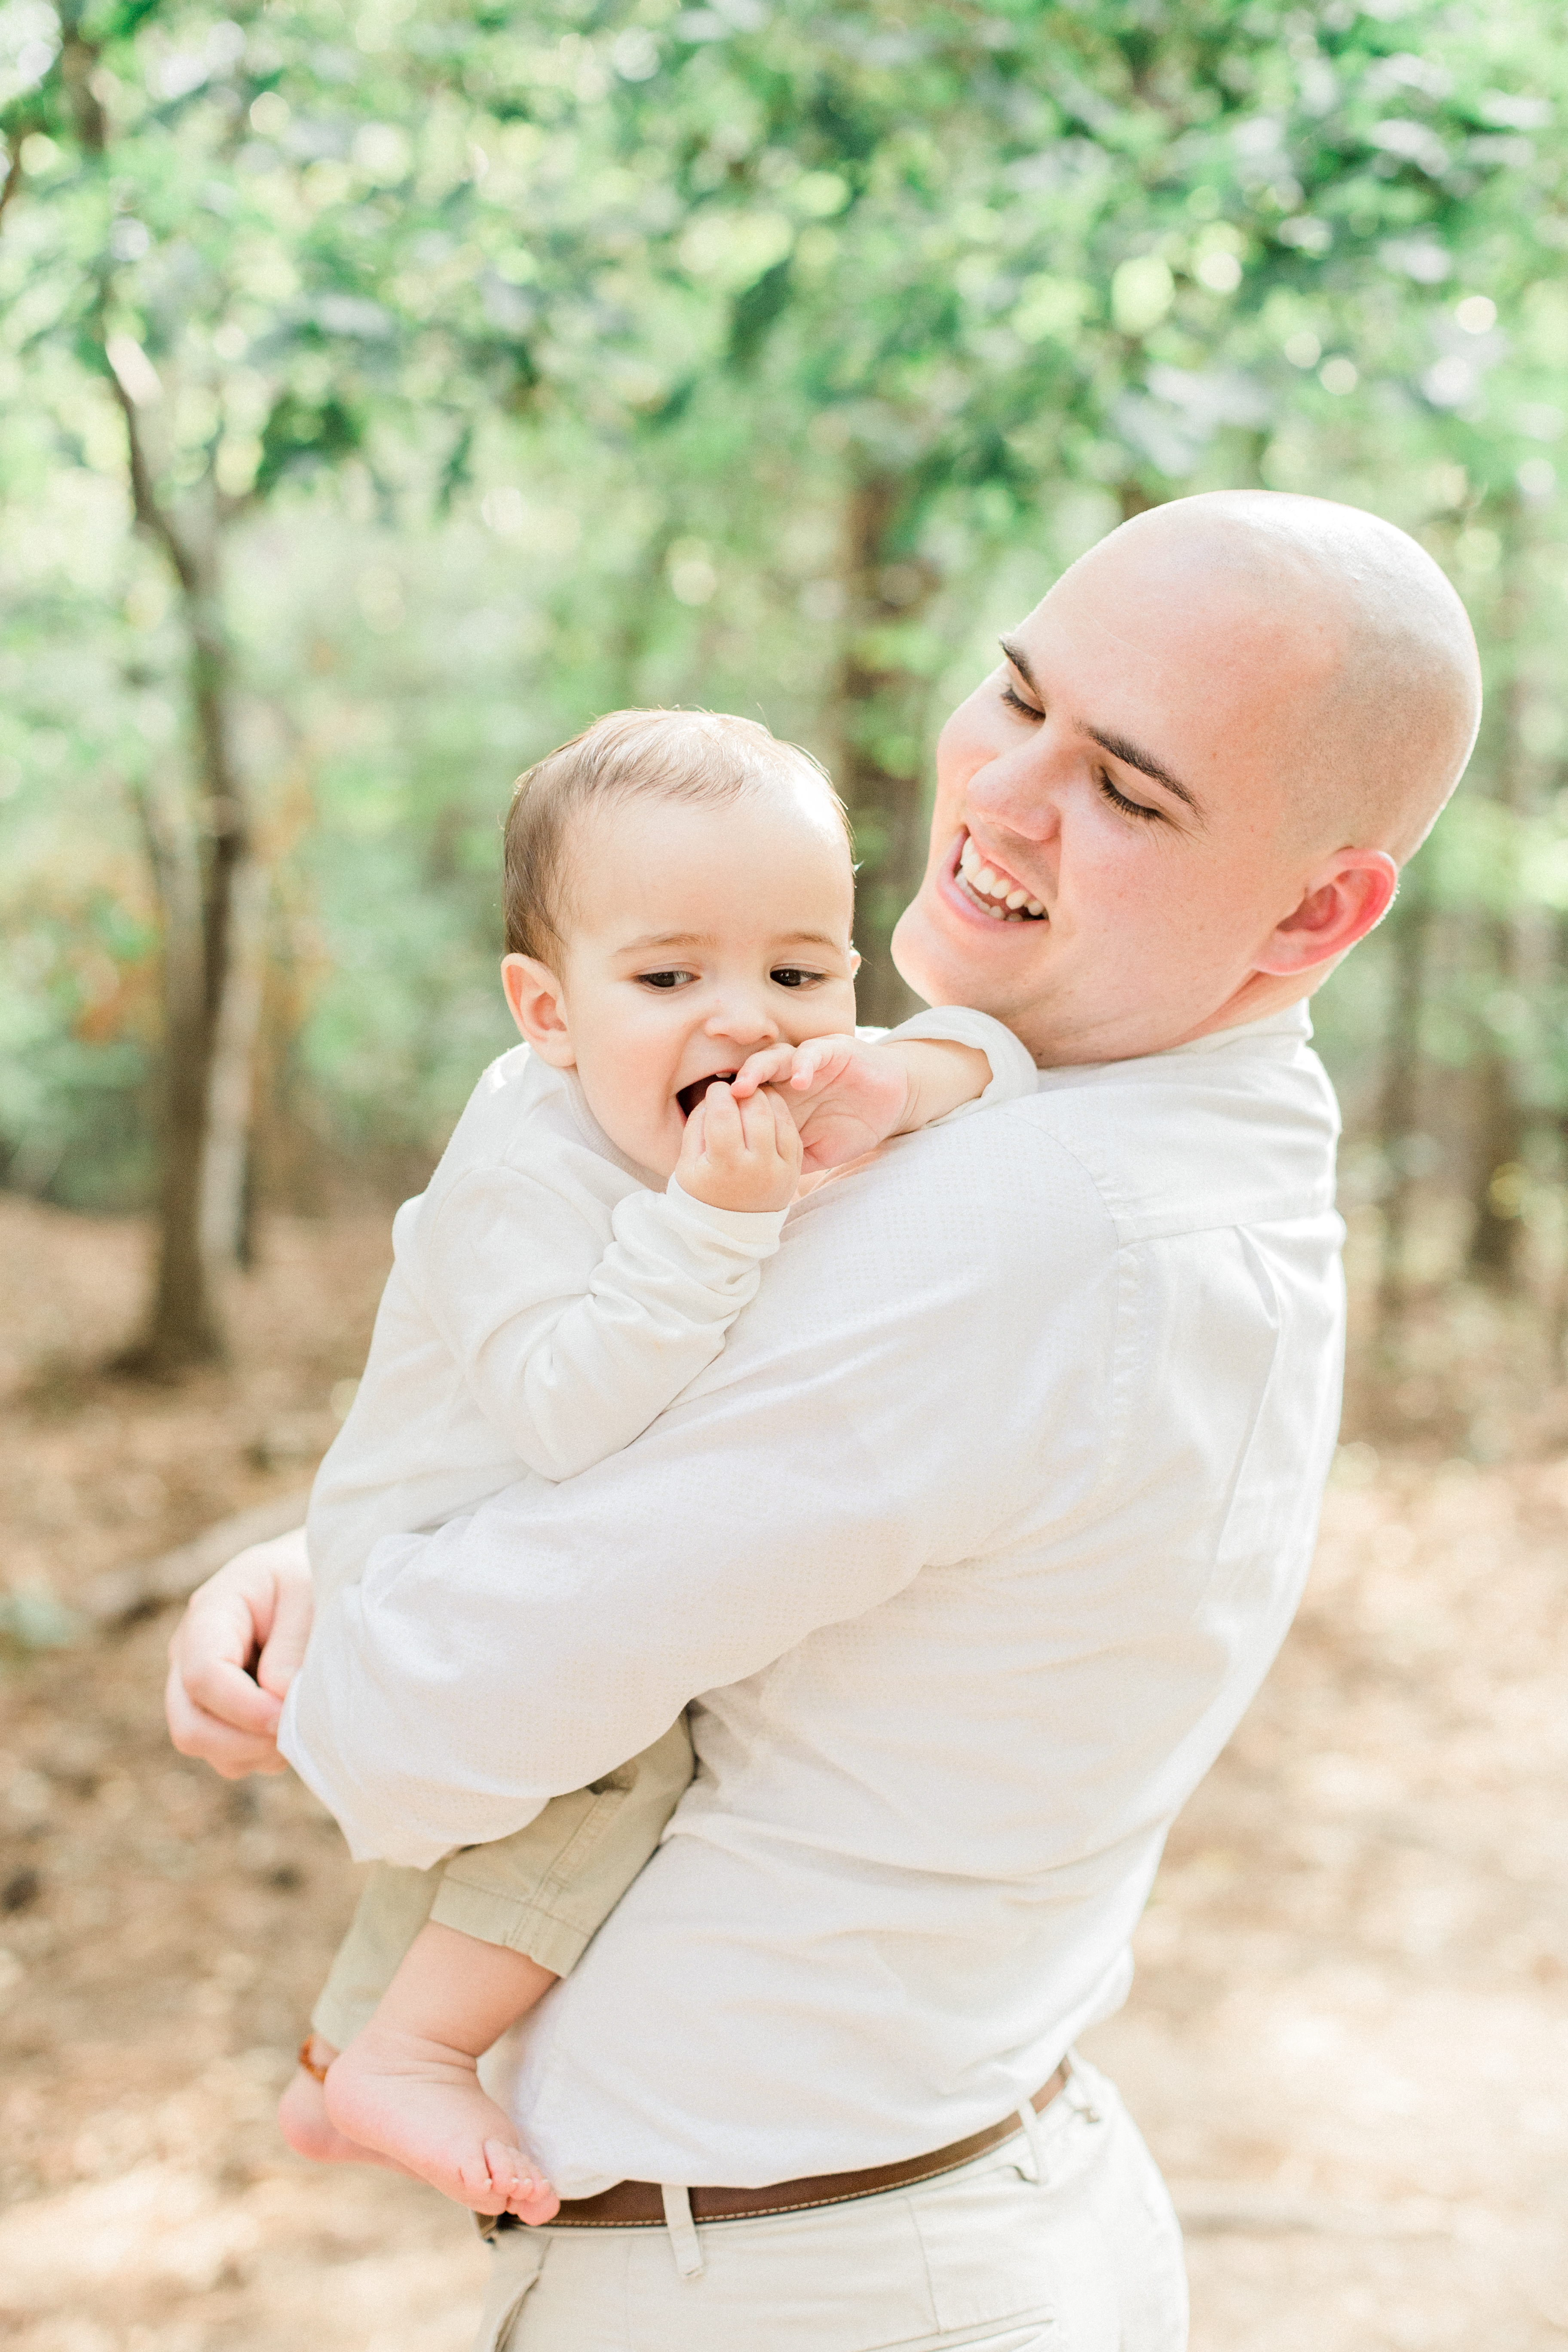 Early fall fine art lifestyle family session in Marietta, Georgia by Kesia Marie Photography.